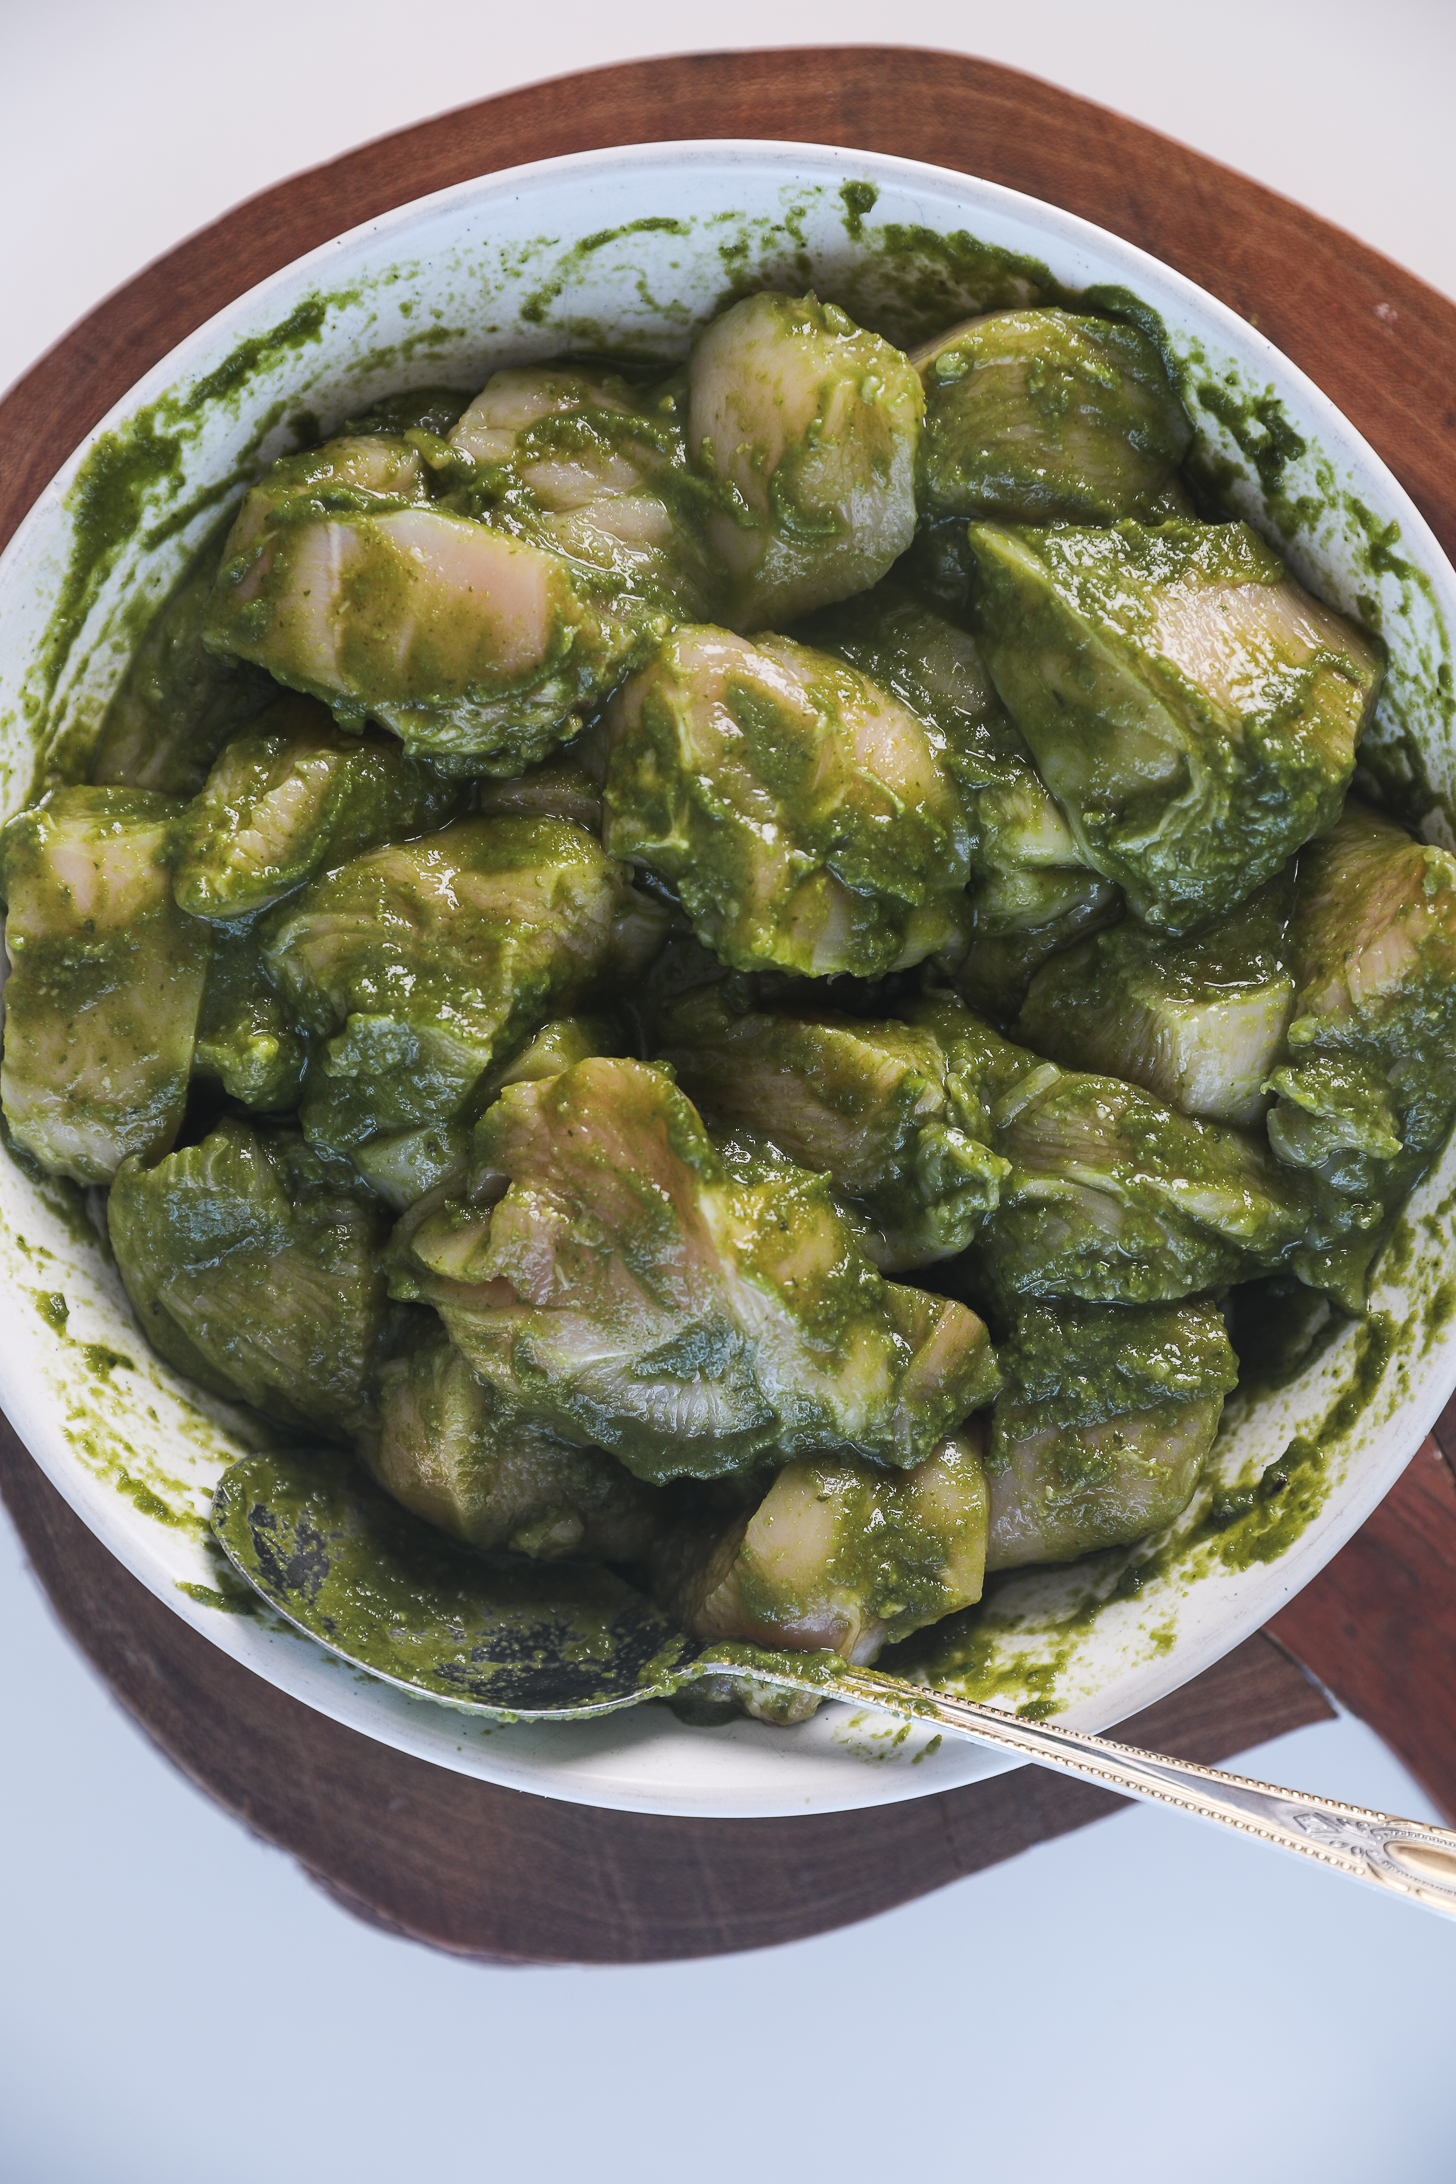 Chicken pieces coated in a green chutney (sauce) in a bowl with a large spoon alongside.